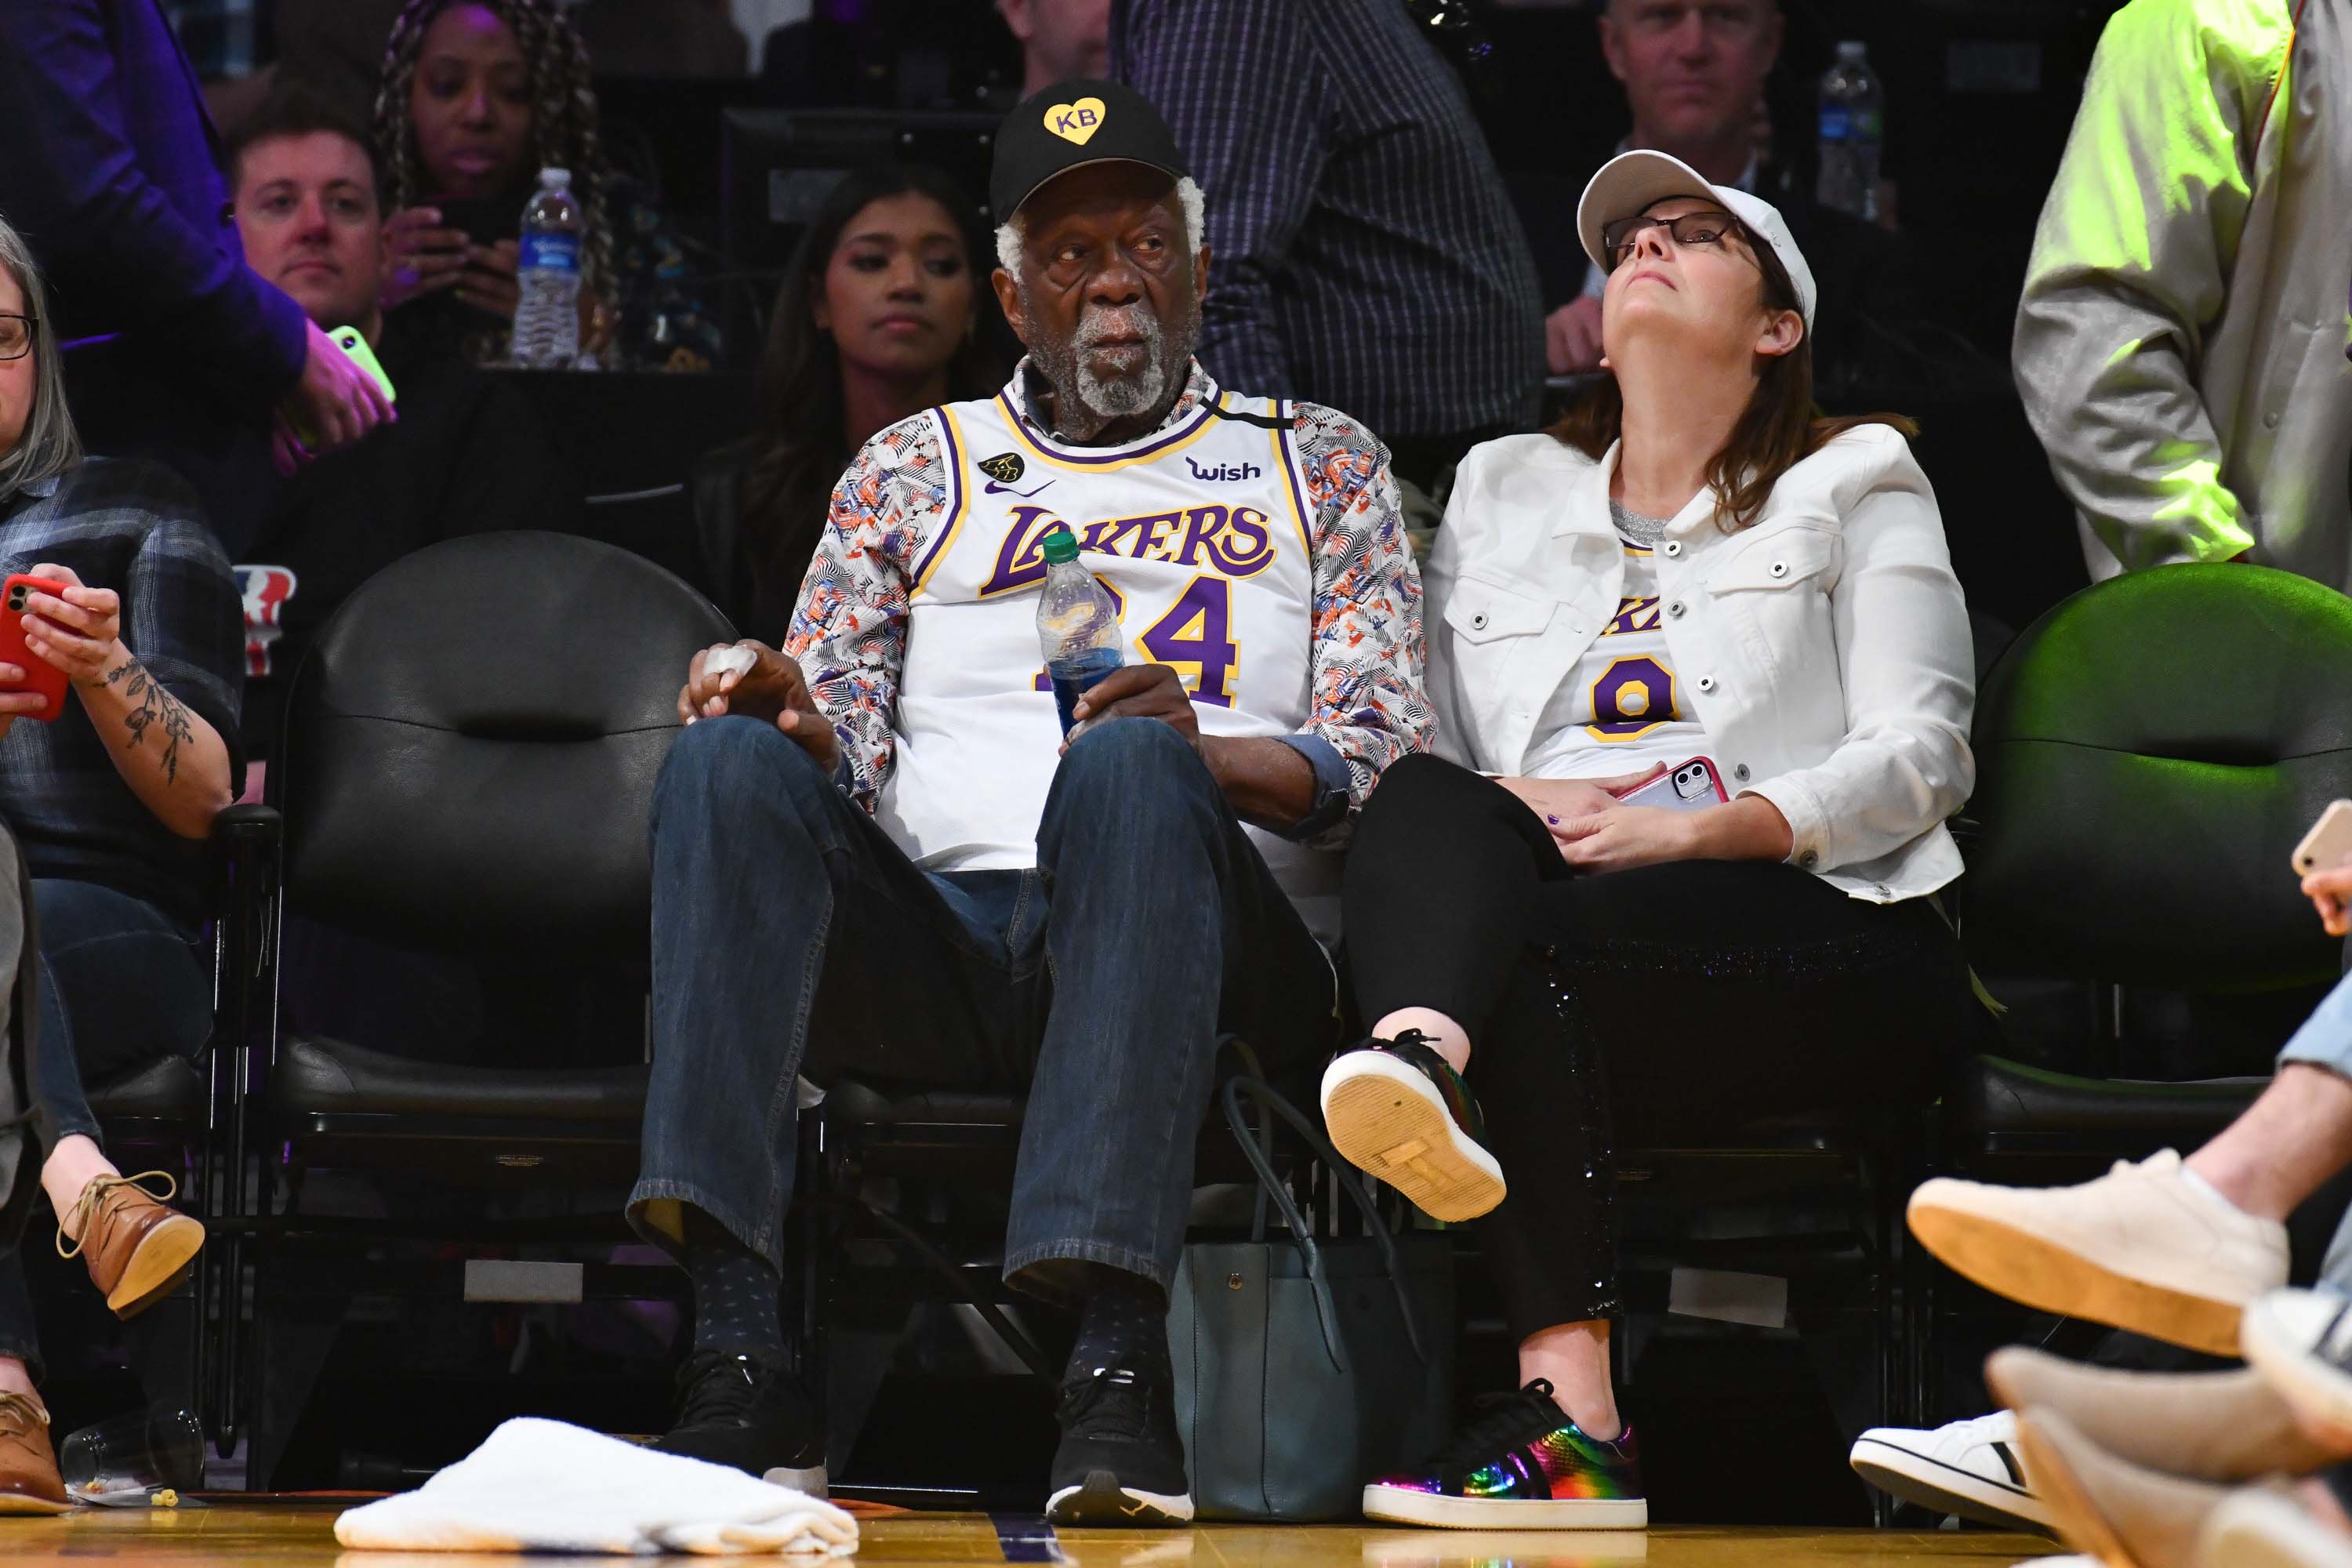 Singer Geri Horner, also known as Ginger Spice, center, sits with her  husband, Christian Horner, right, and Los Angeles Lakers owner Jeanie Buss  during the second half of an NBA basketball game against the San Antonio  Spurs, Monday, Oct. 22, 2018, in